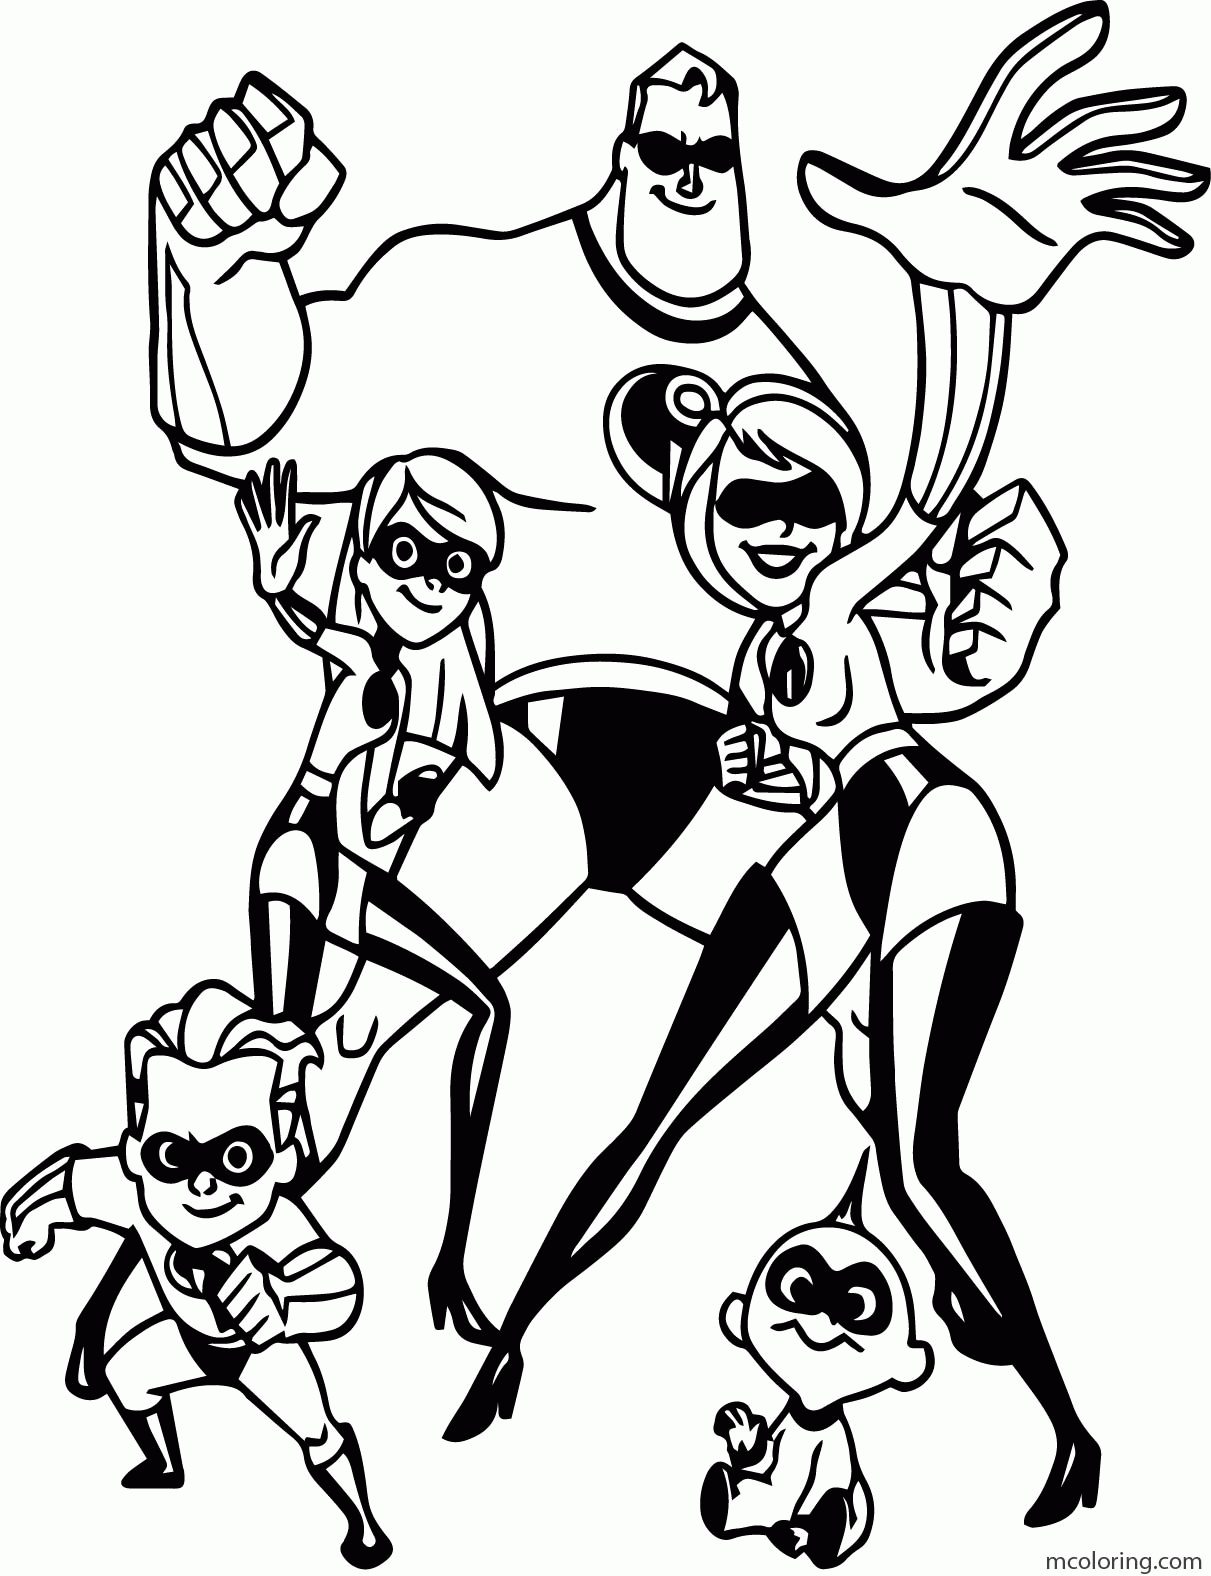 Disney The Incredibles Coloring Pages Download And Print For Free ...